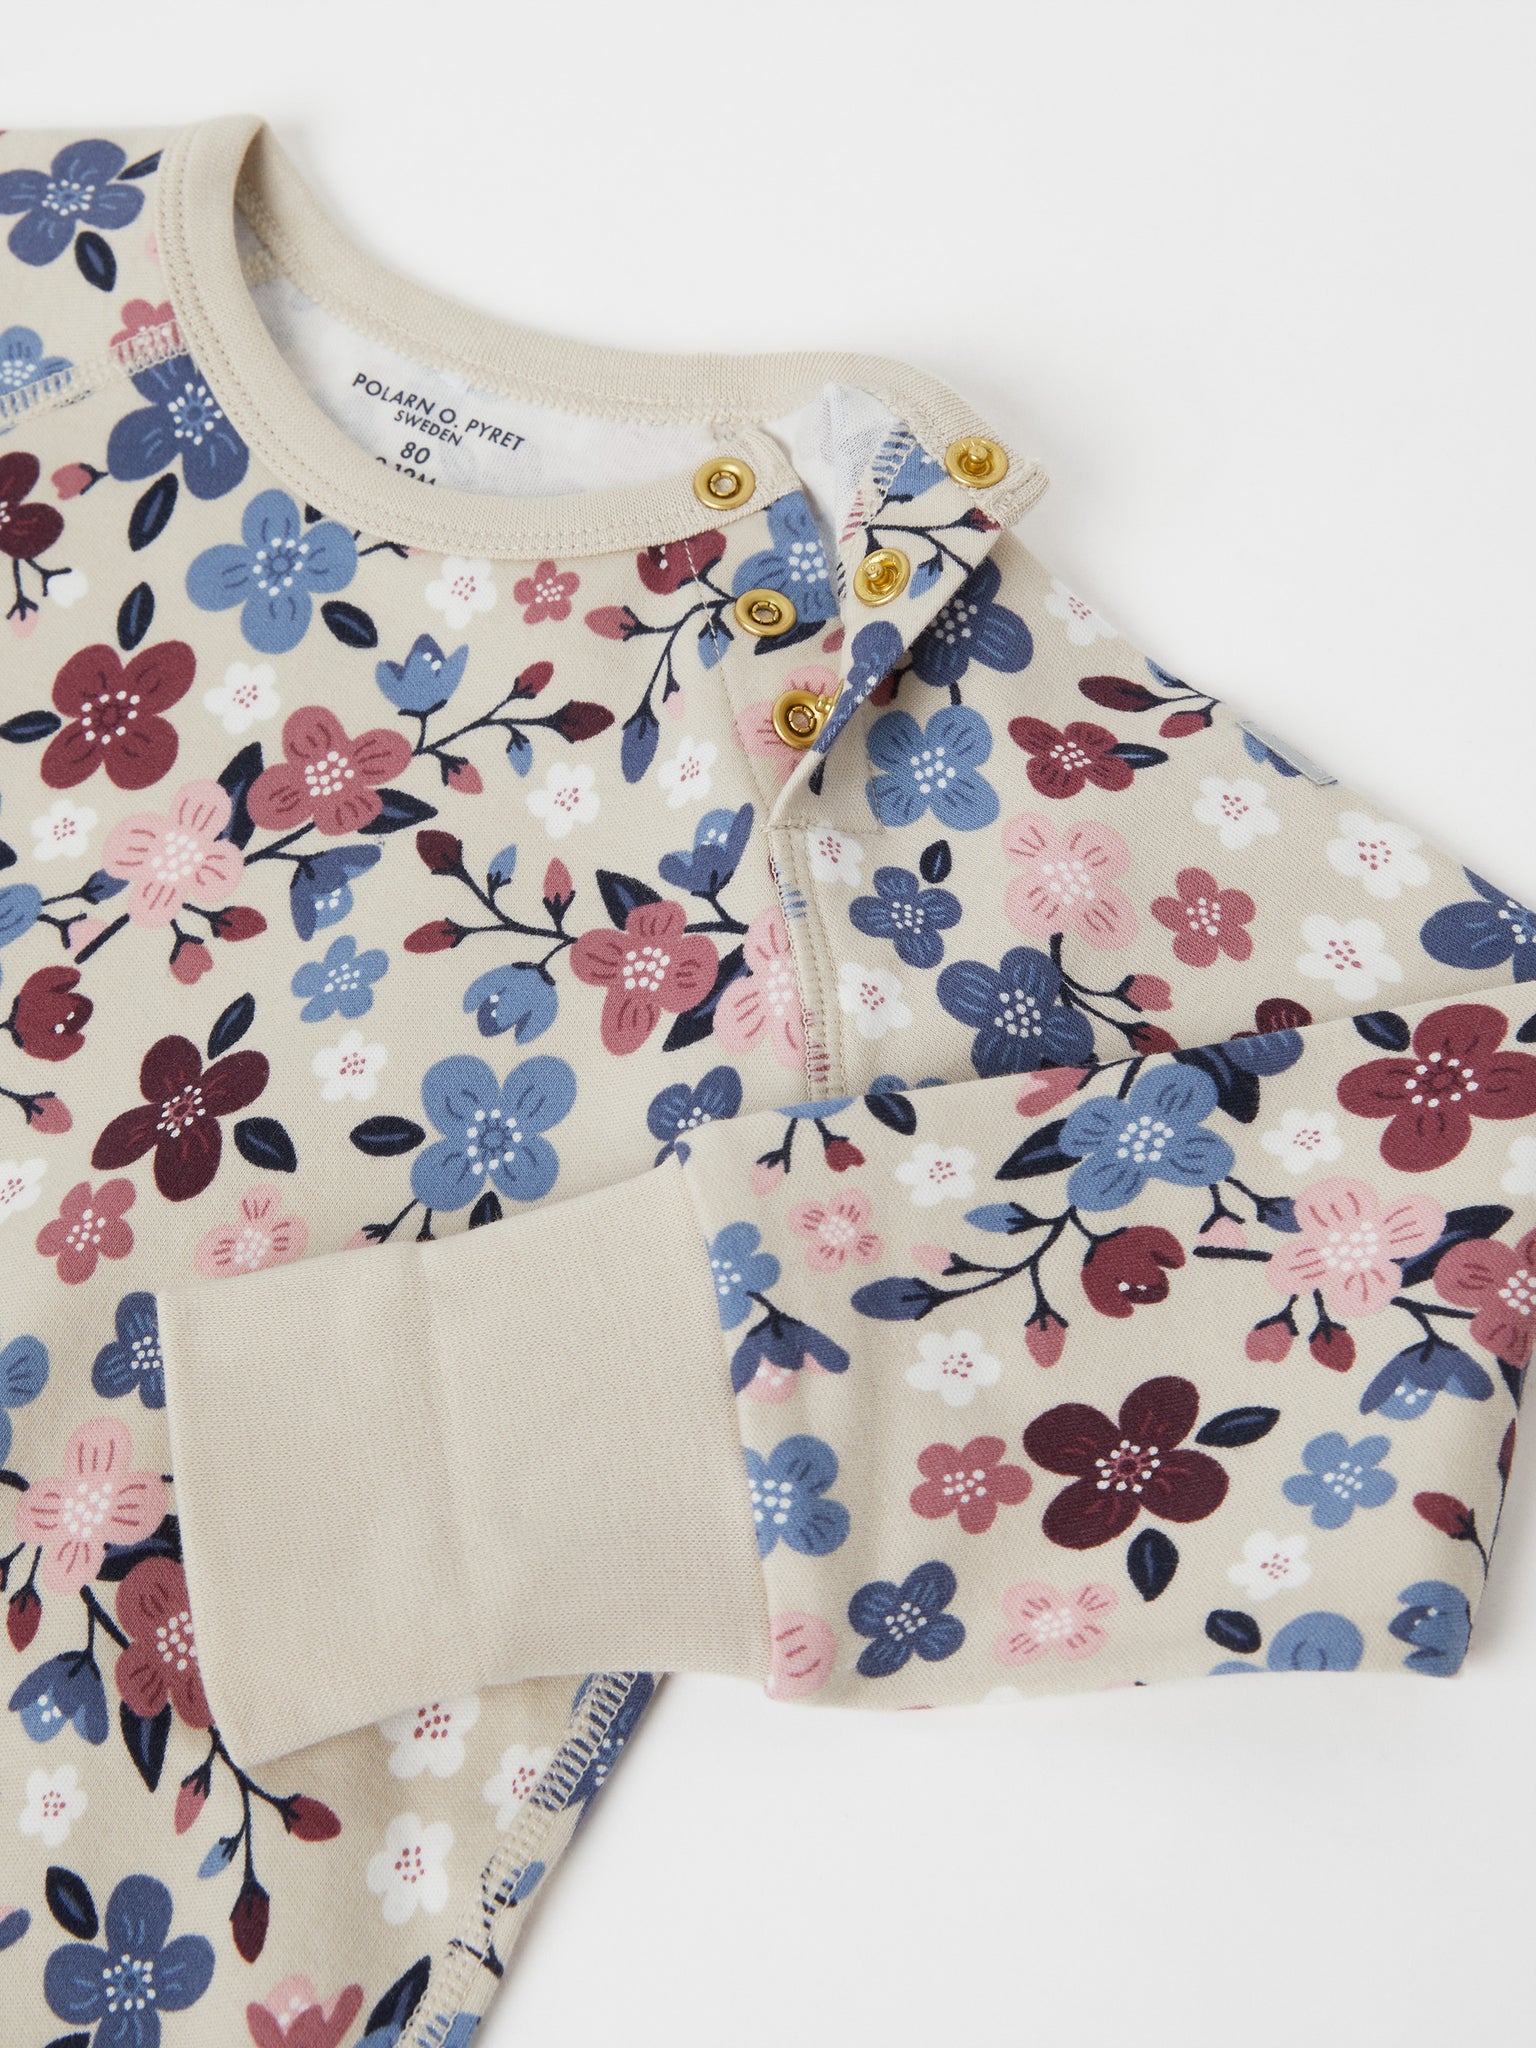 Organic Cotton Floral Babygrow from the Polarn O. Pyret baby collection. The best ethical baby clothes